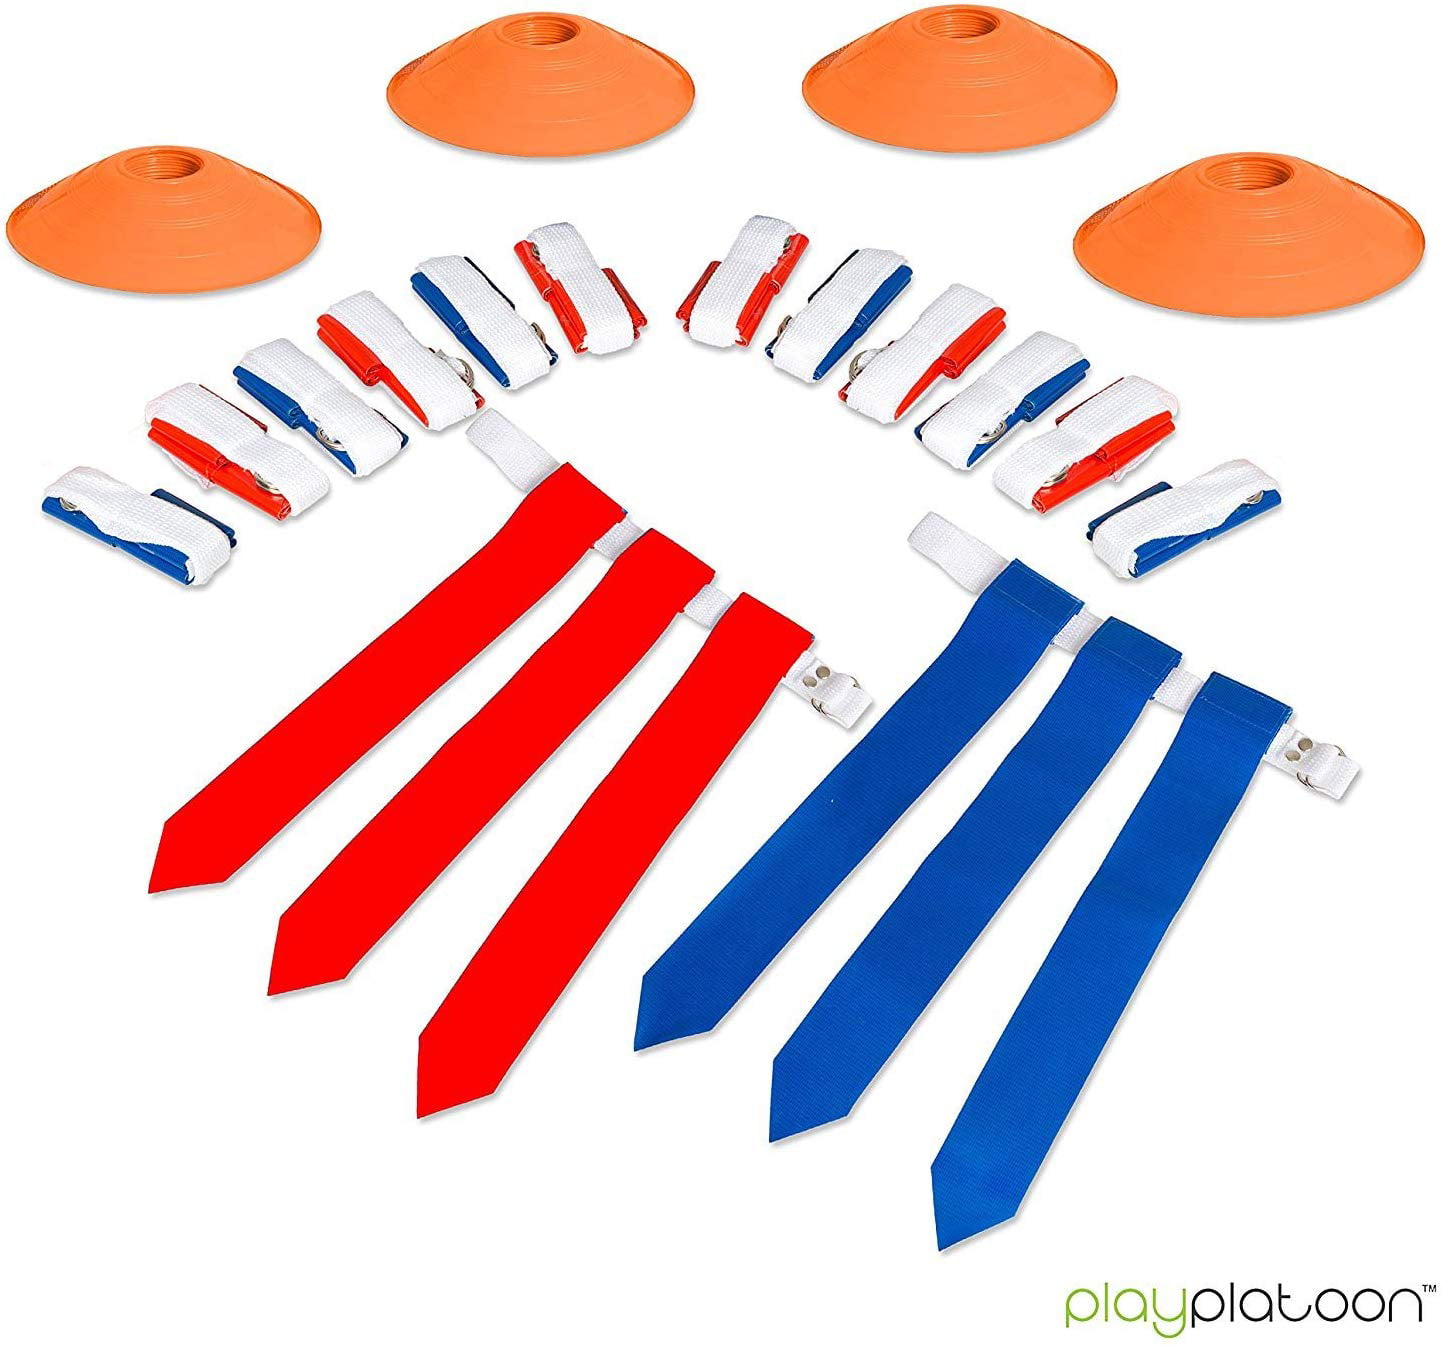 Practices Training Crown Sporting Goods 6-Pack Flag Football Team Set Includes 6 Belts with 12 Flags Accessories for Flag & Touch Games 